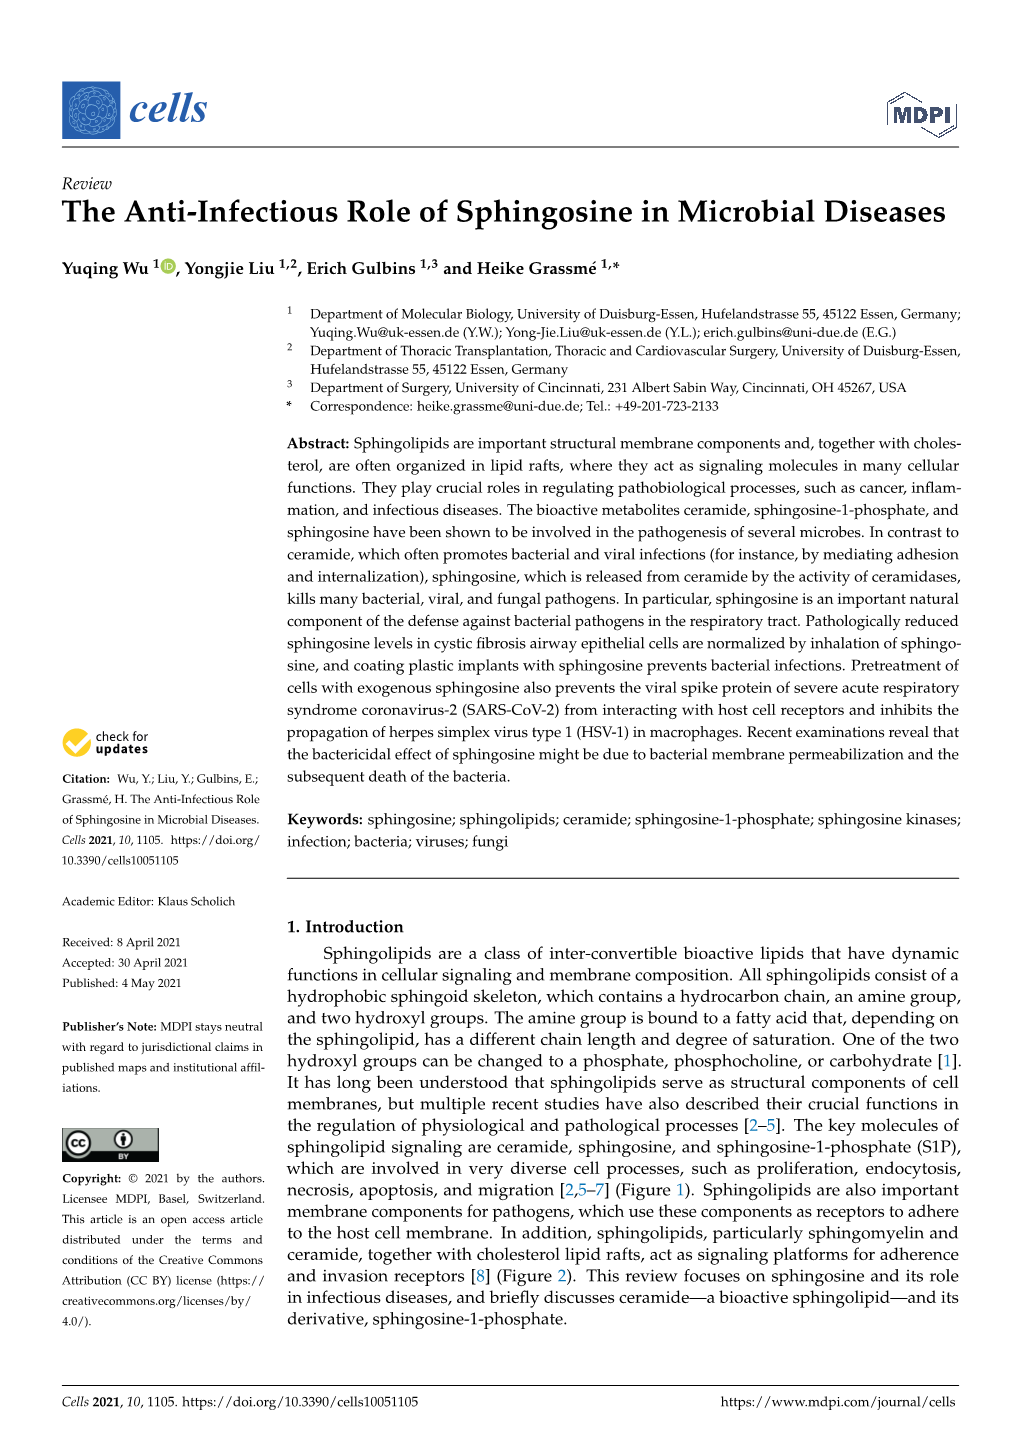 The Anti-Infectious Role of Sphingosine in Microbial Diseases